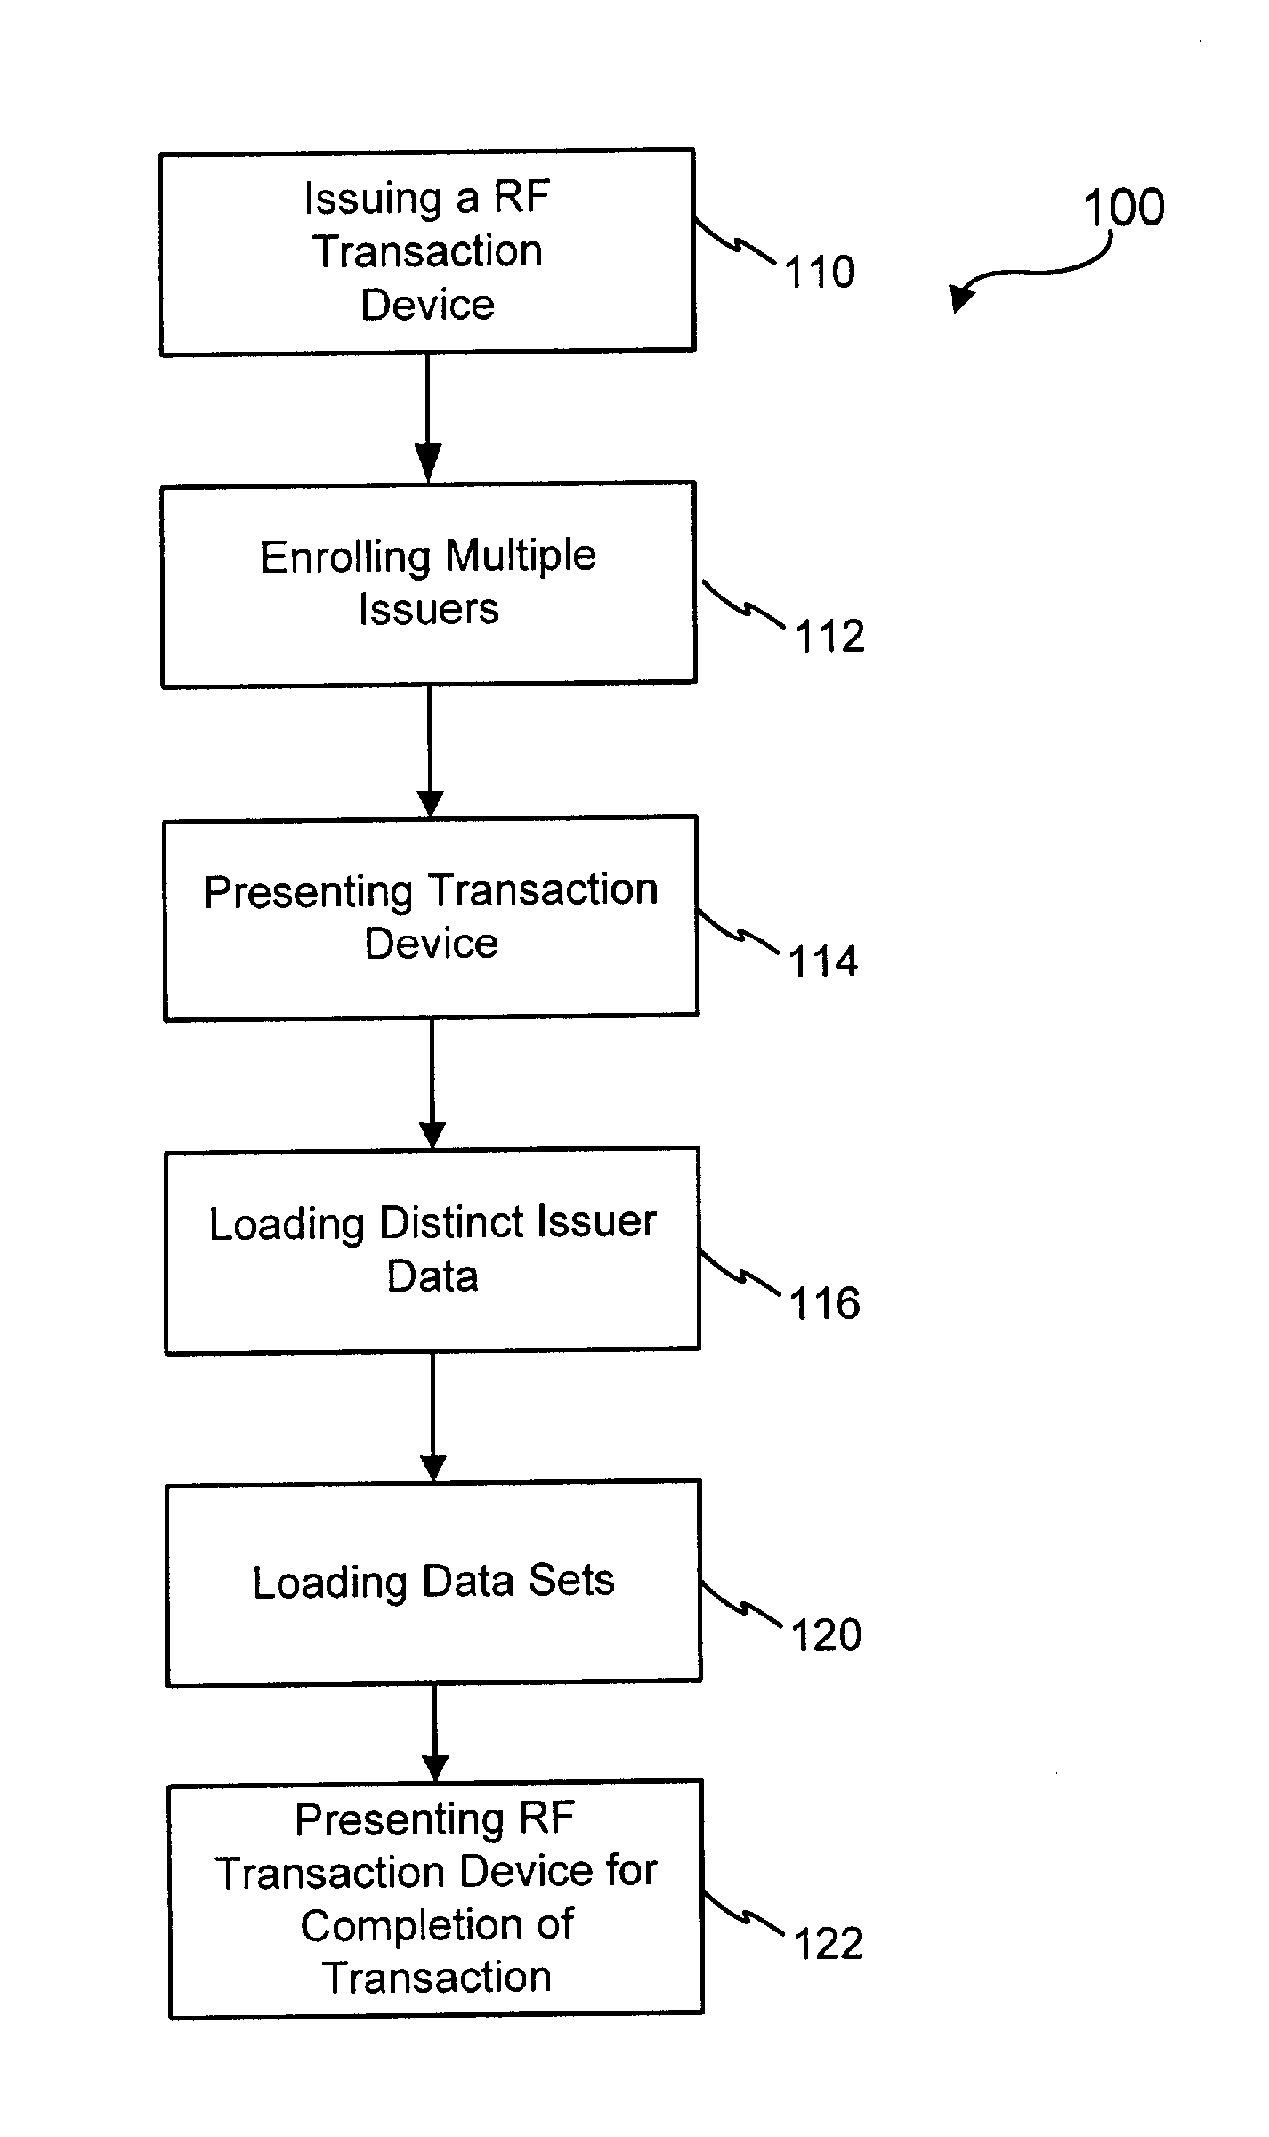 Systems and methods for providing a RF transaction device for use in a private label transaction